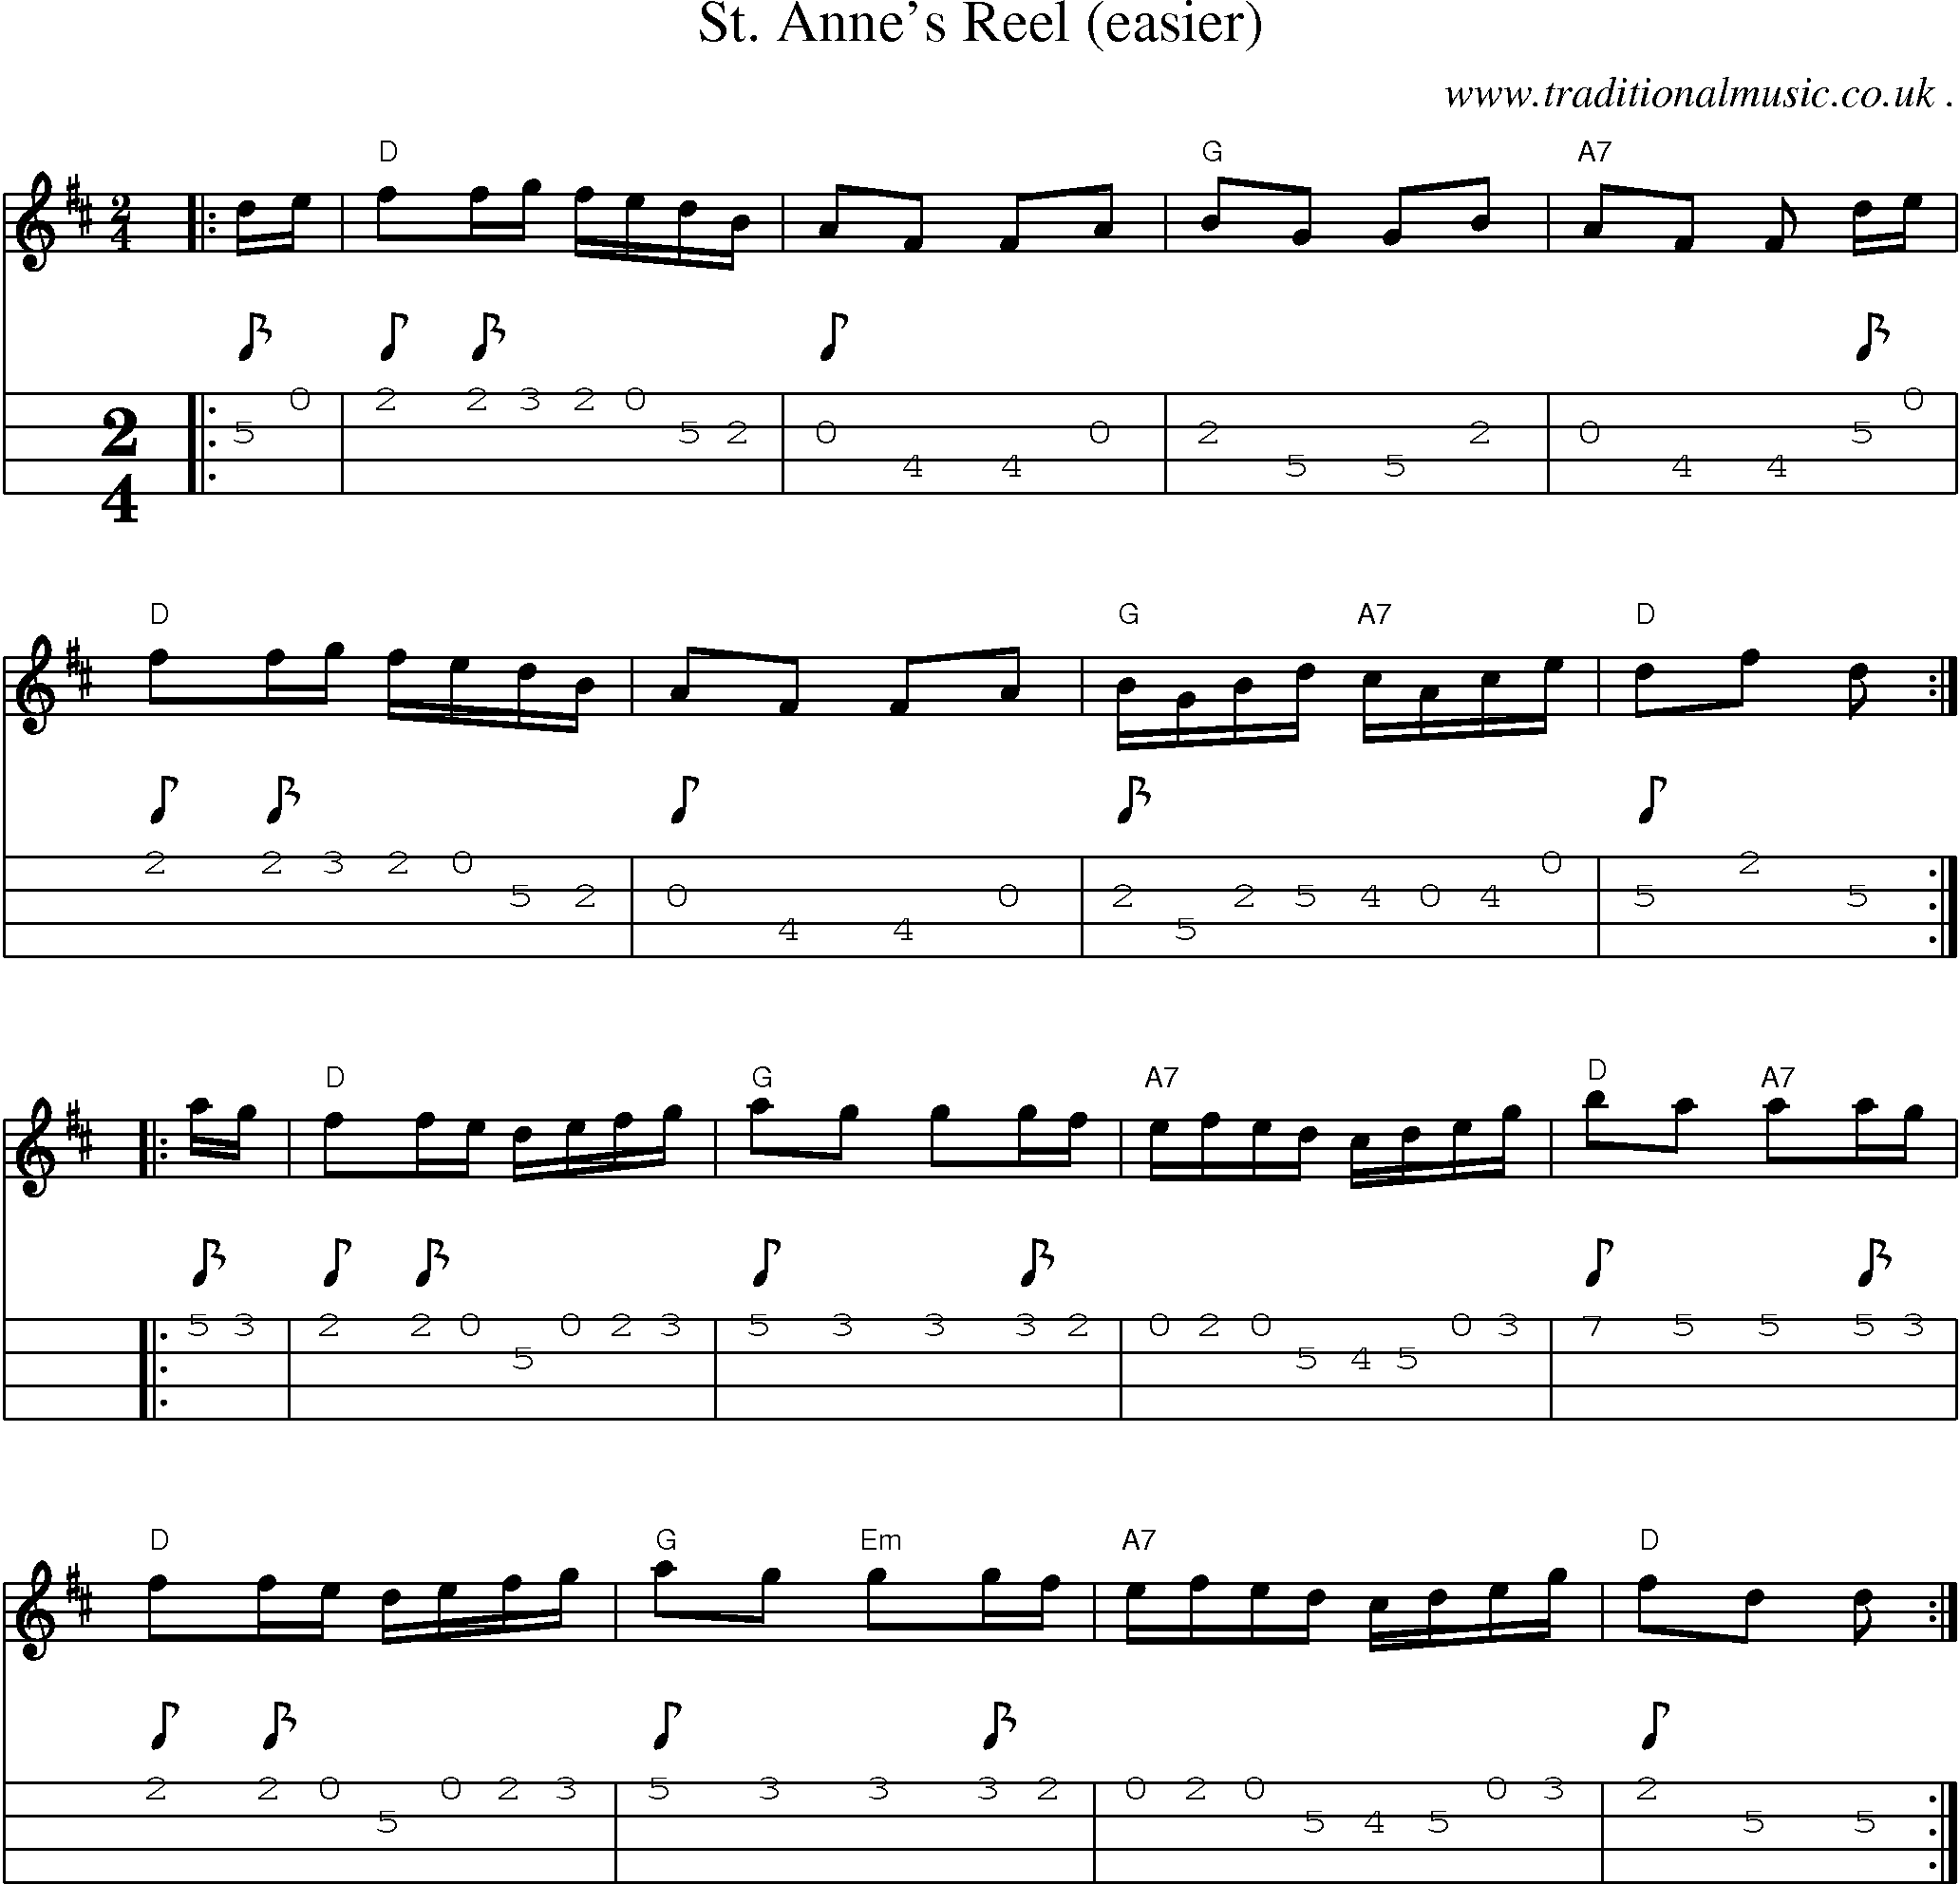 Music Score and Guitar Tabs for St Annes Reel (easier)